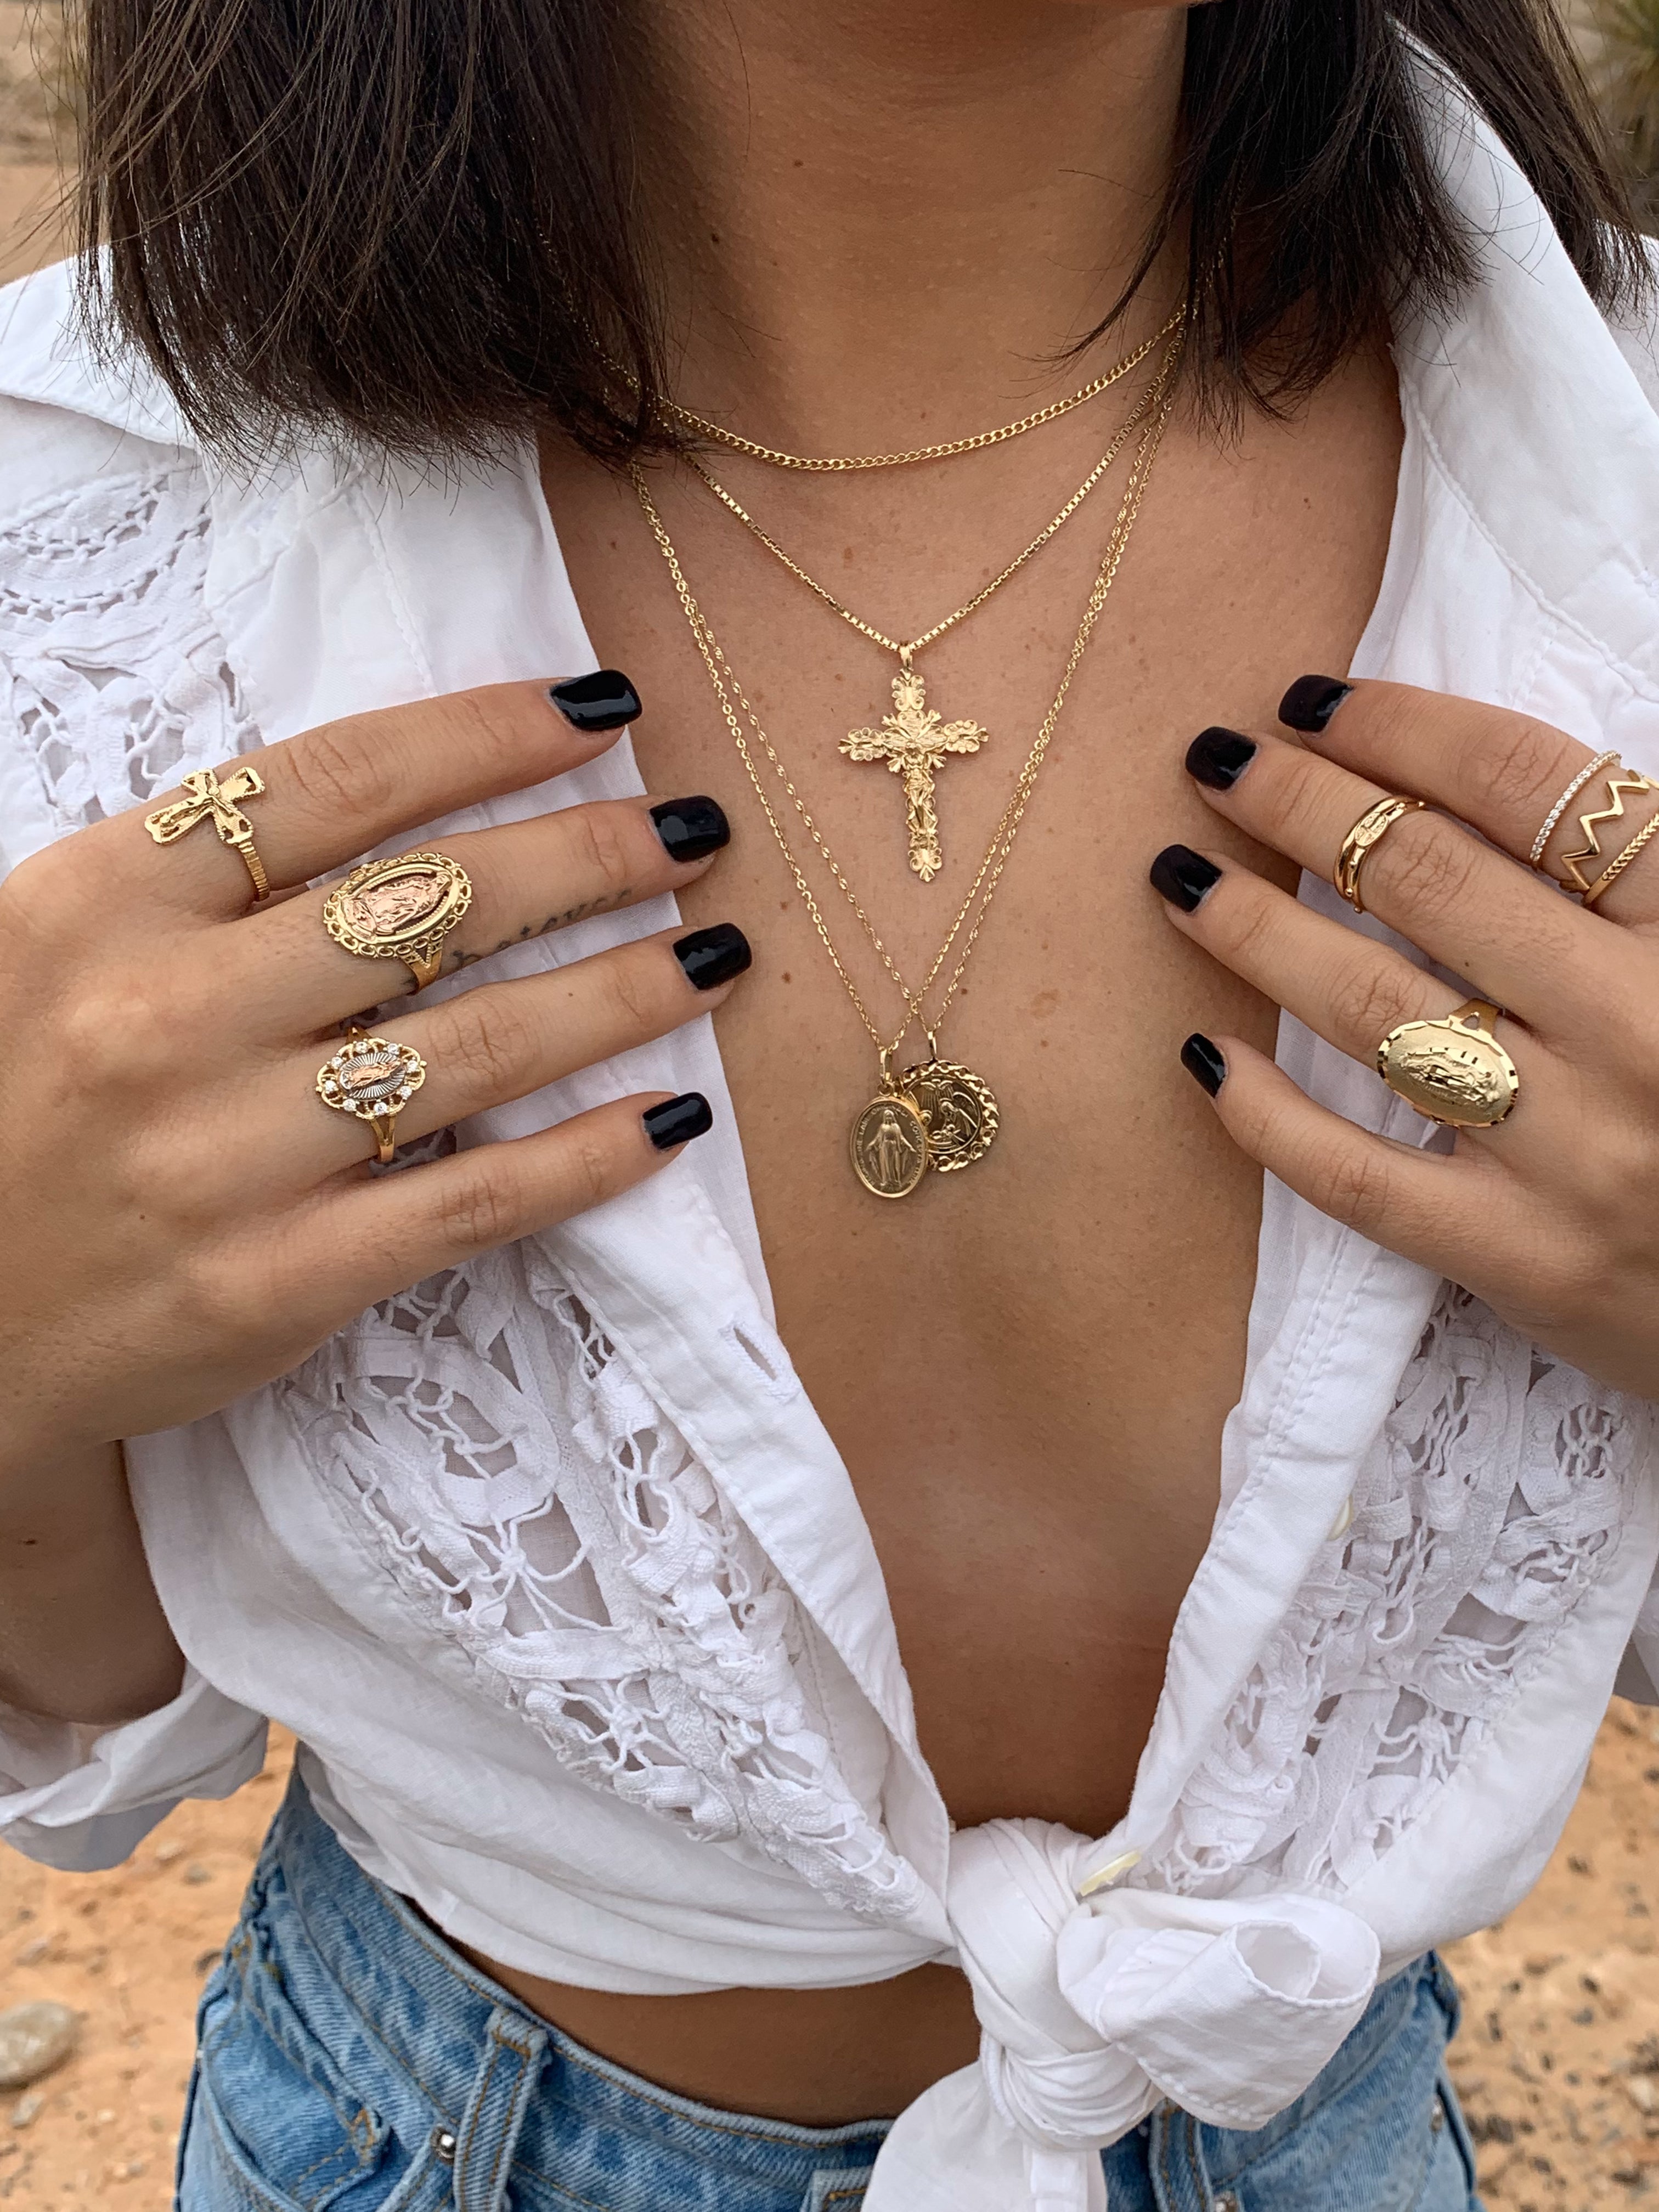 THE HAIL MARY BLING RING